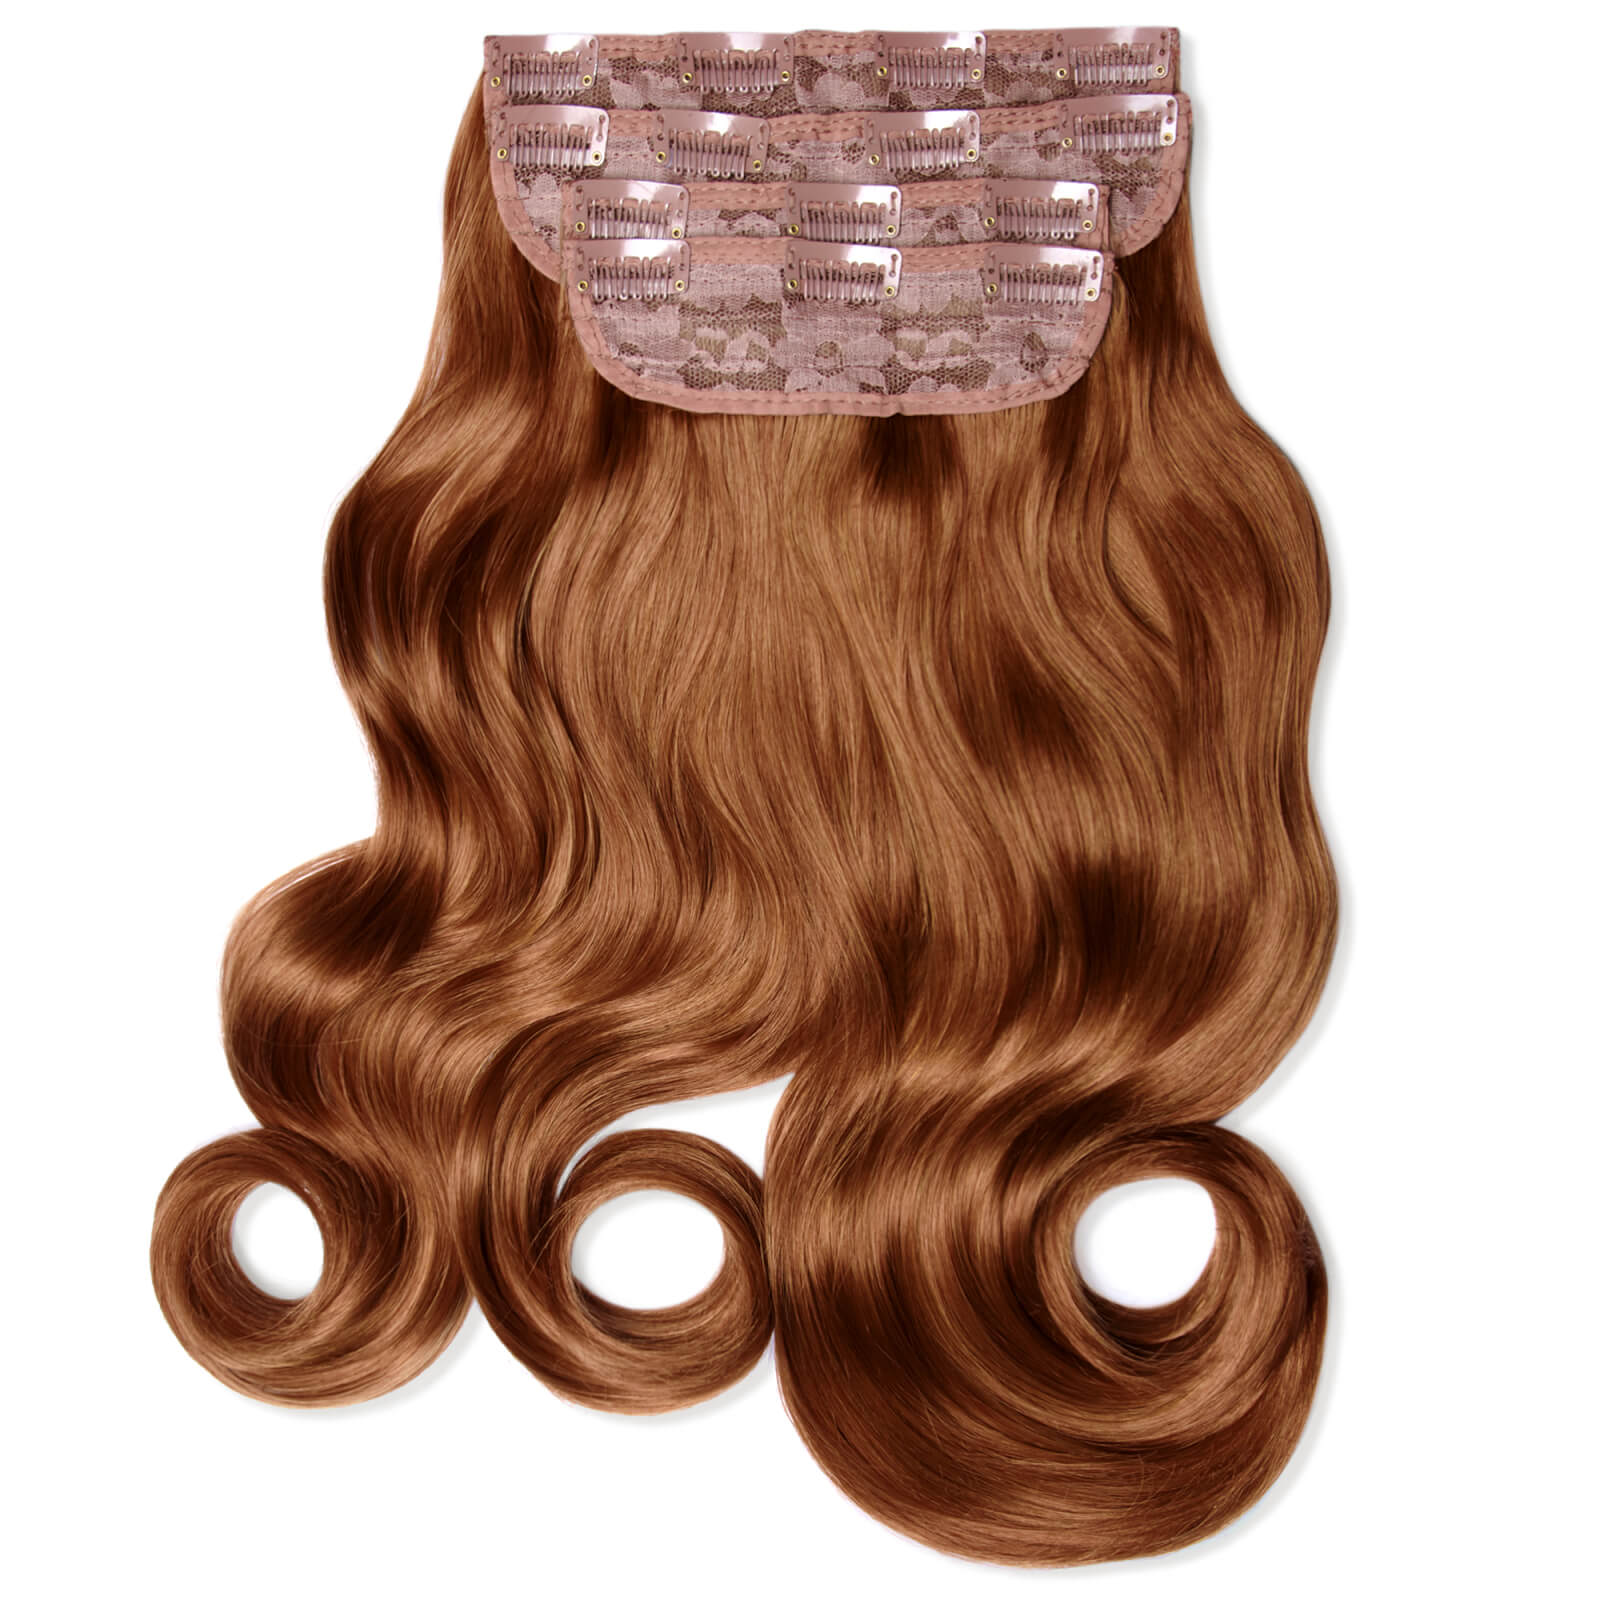 LullaBellz Ultimate Half Up Half Down 22  Curly Extension and Pony Set (Variouse Shades - Mixed Auburn